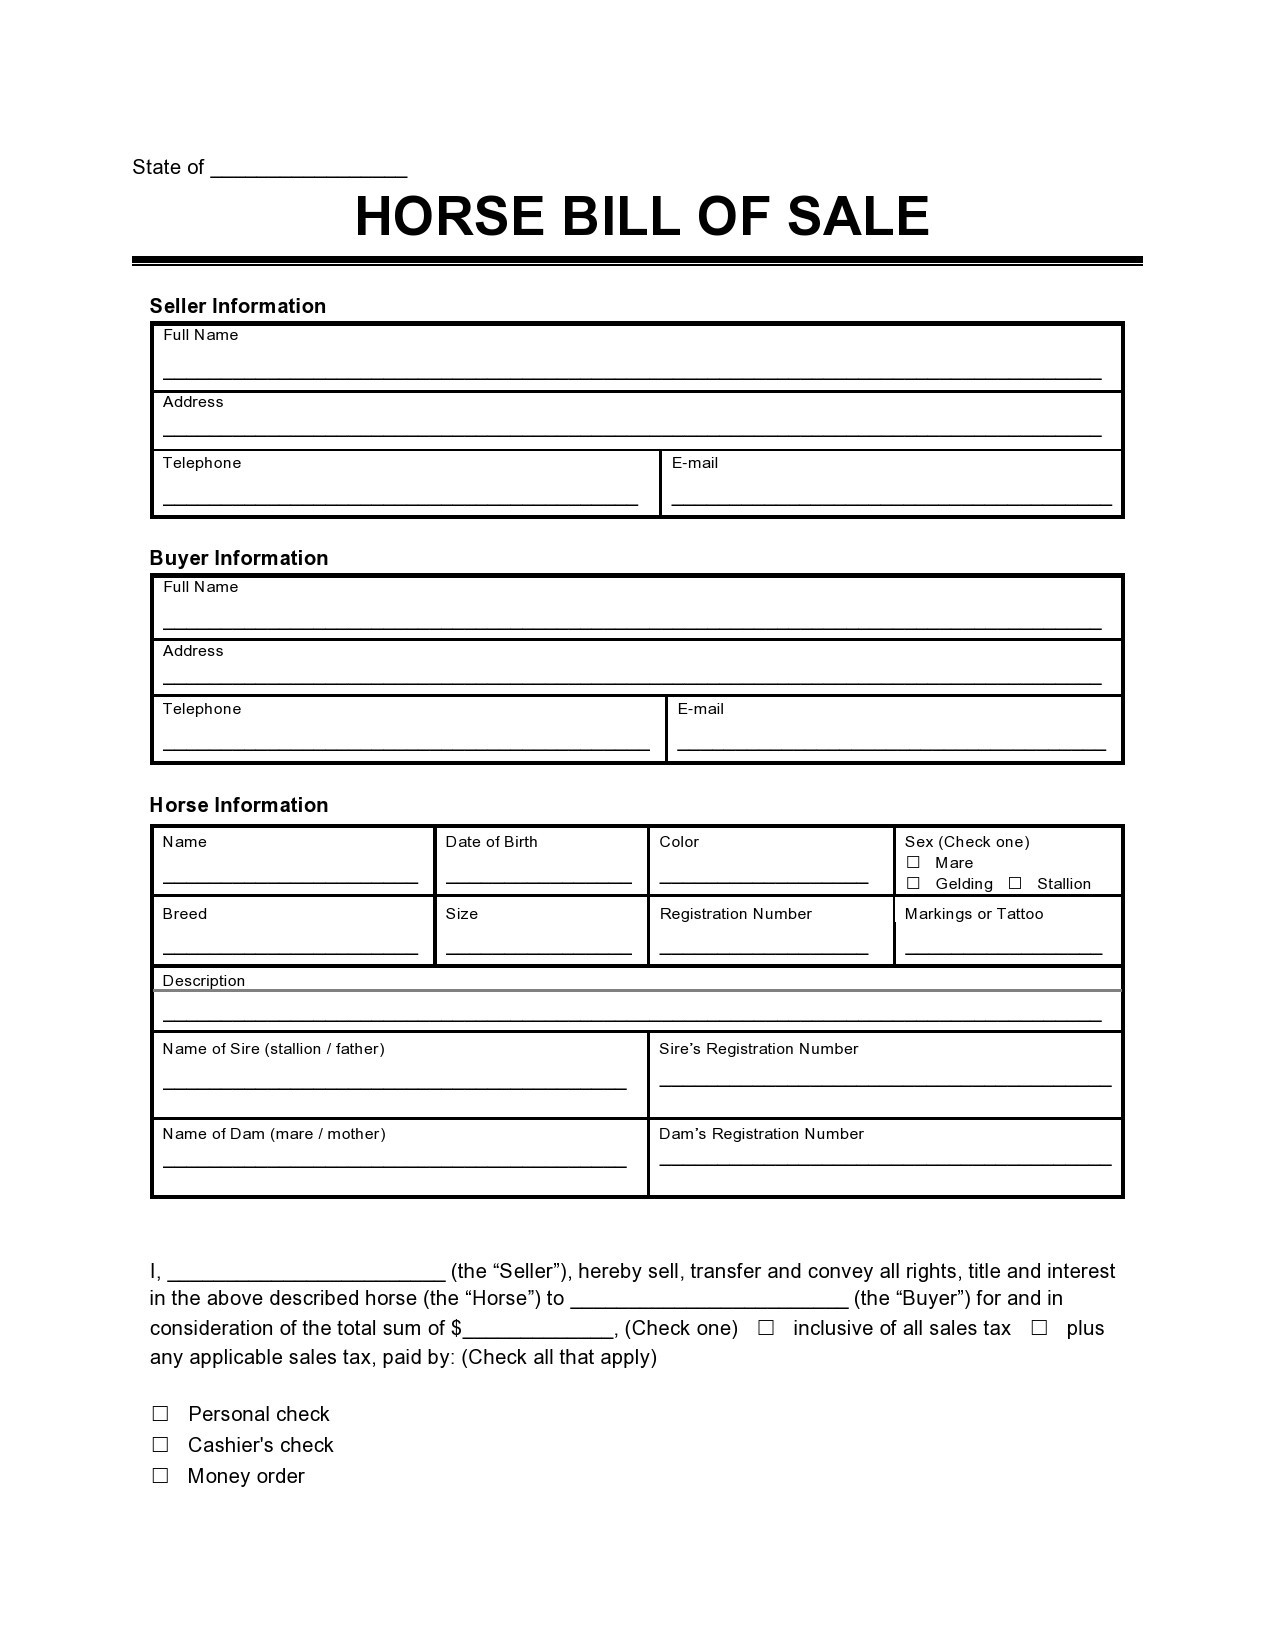 Free horse bill of sale 04